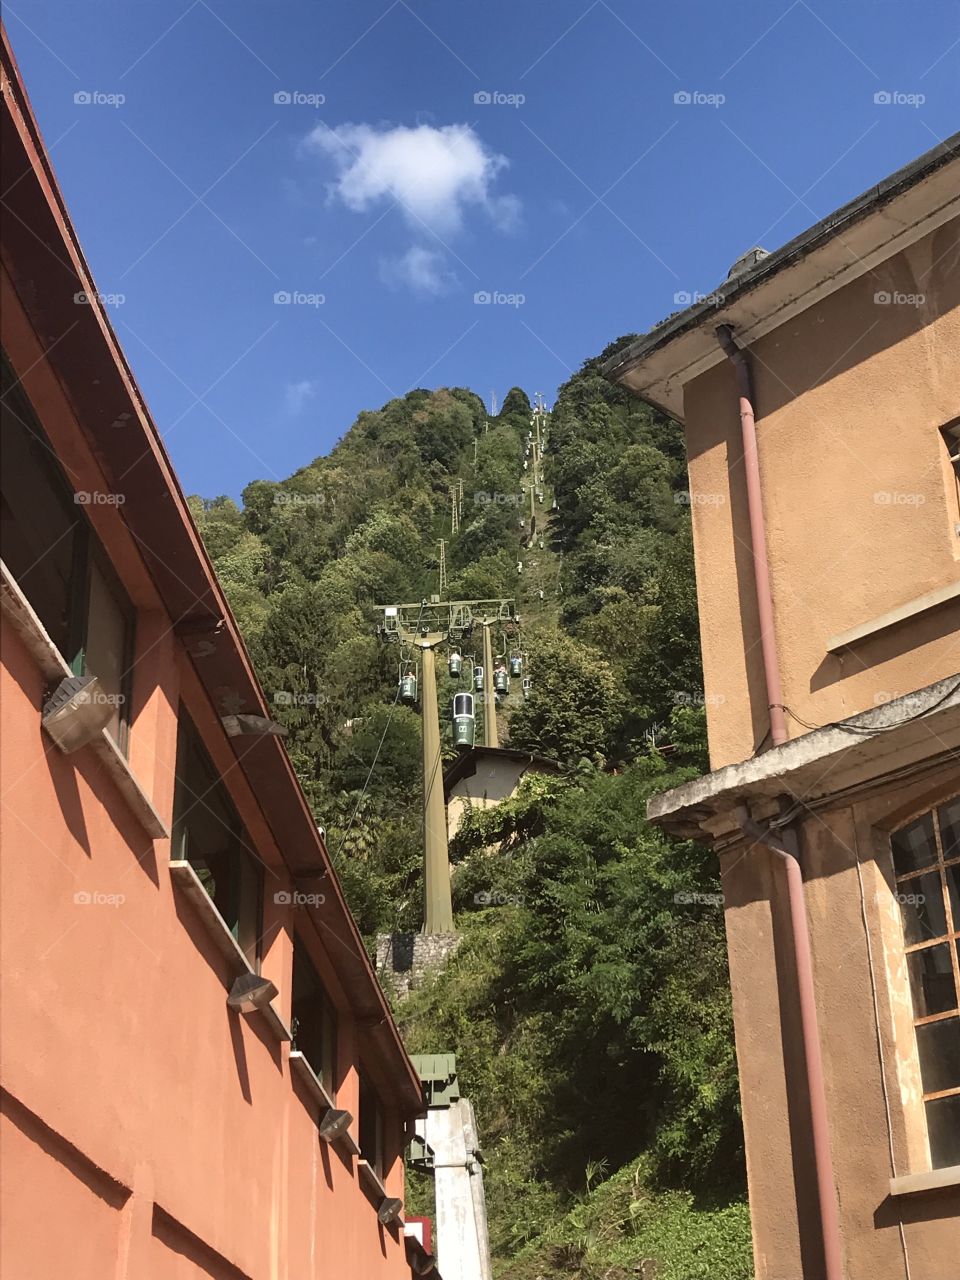 Upward’s trail of a cable car